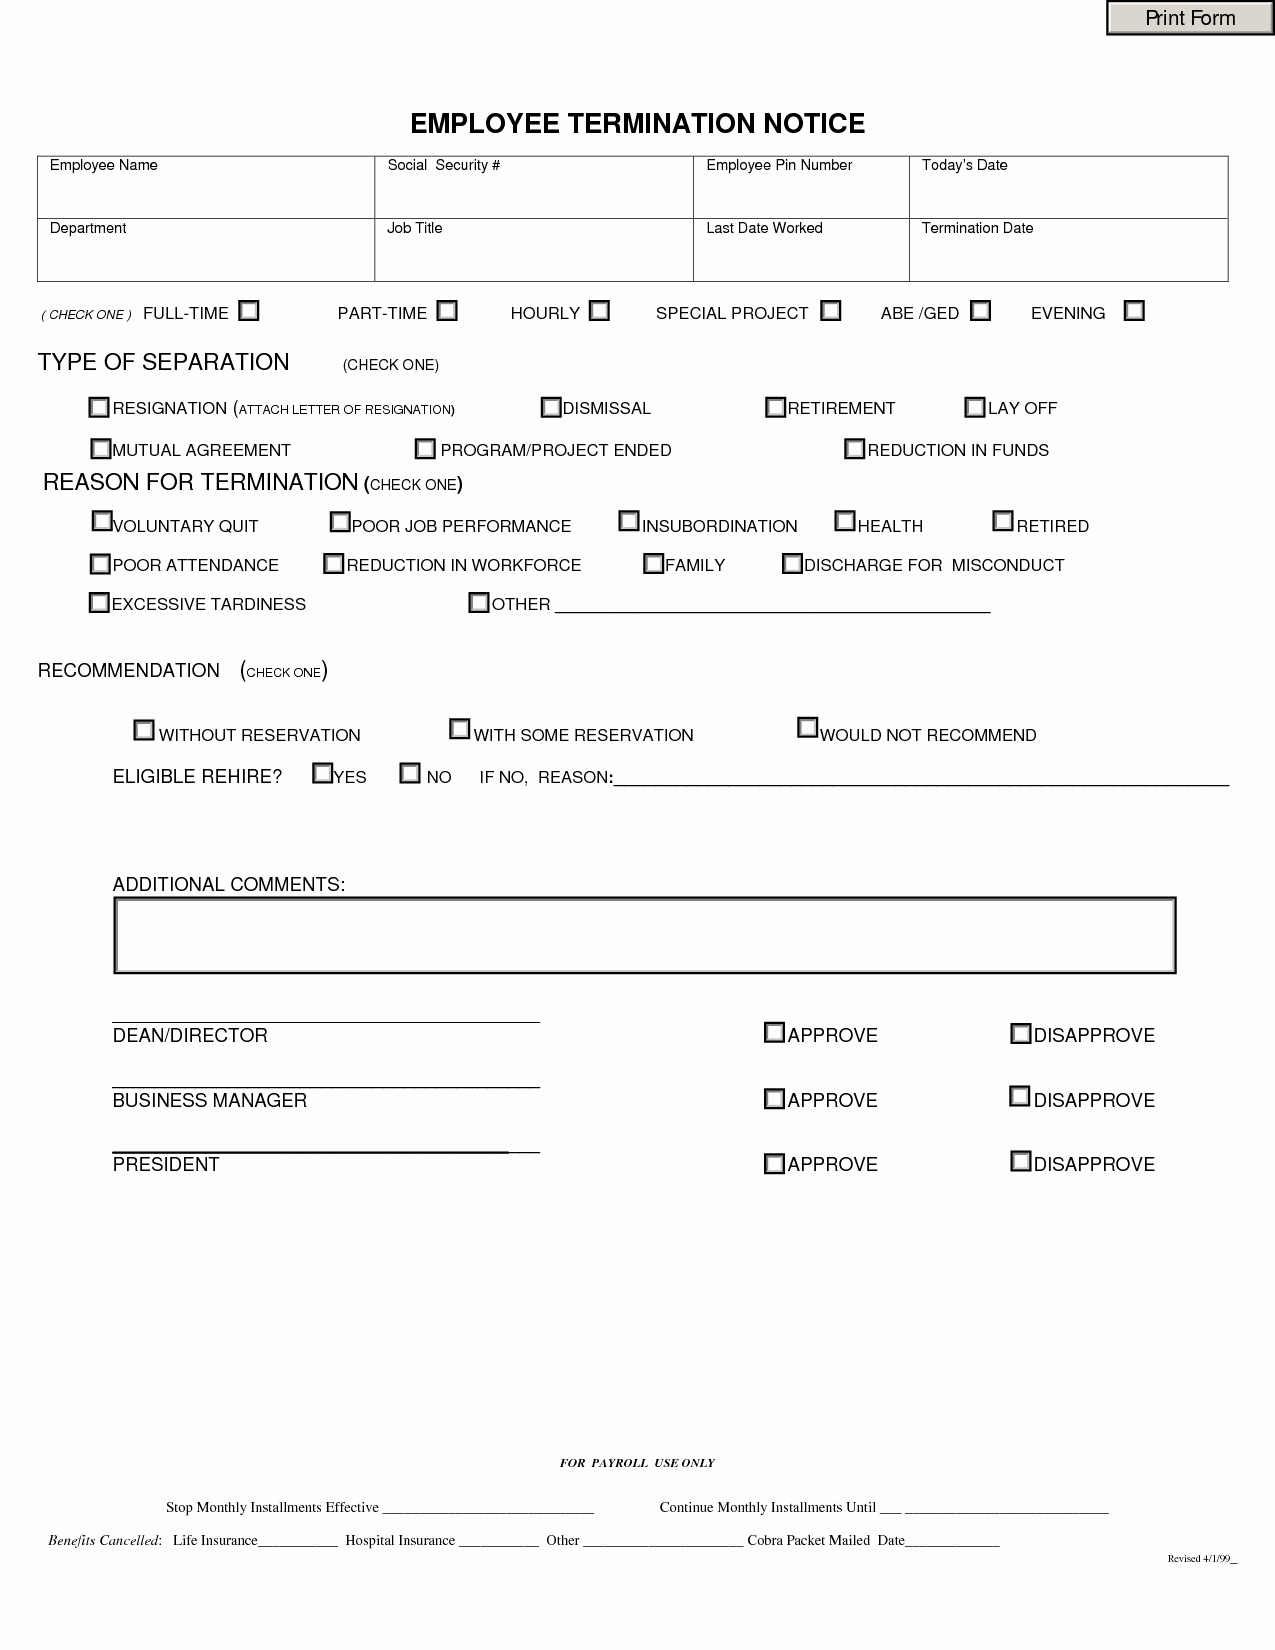 Free Employment Termination forms Inspirational Separation Notice Template – Printable Year Calendar